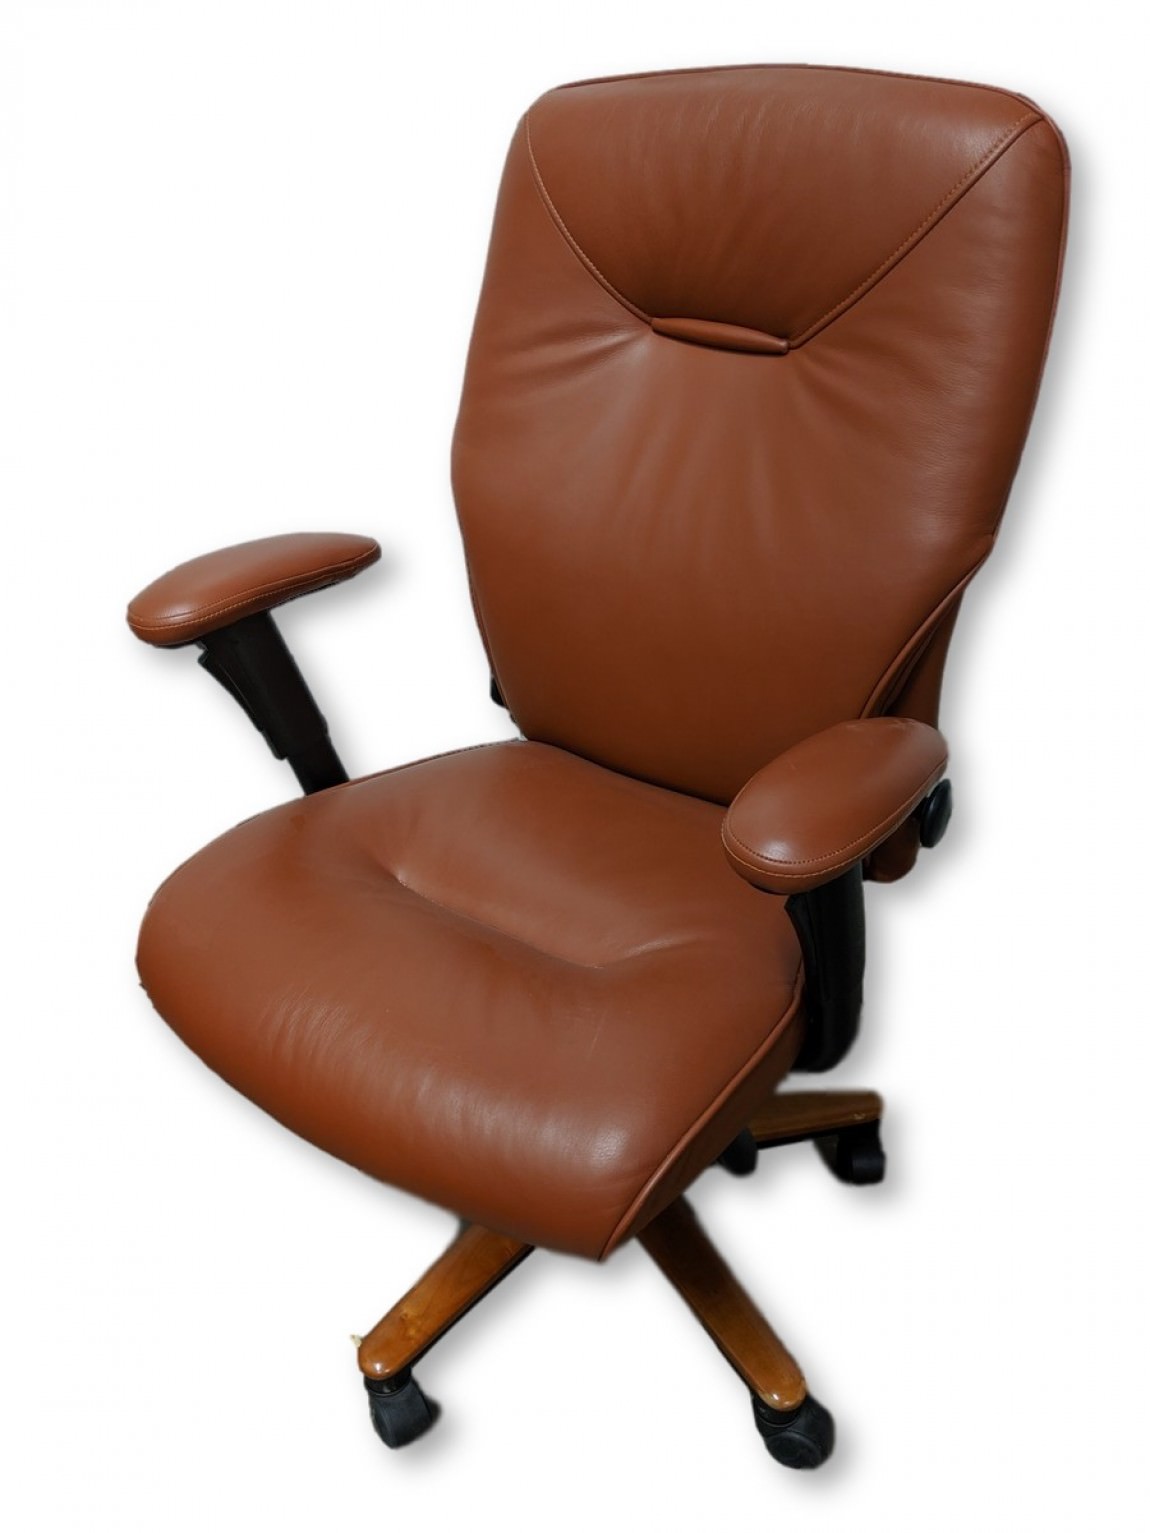 Brayton International Brown Leather High Back Office Chairs